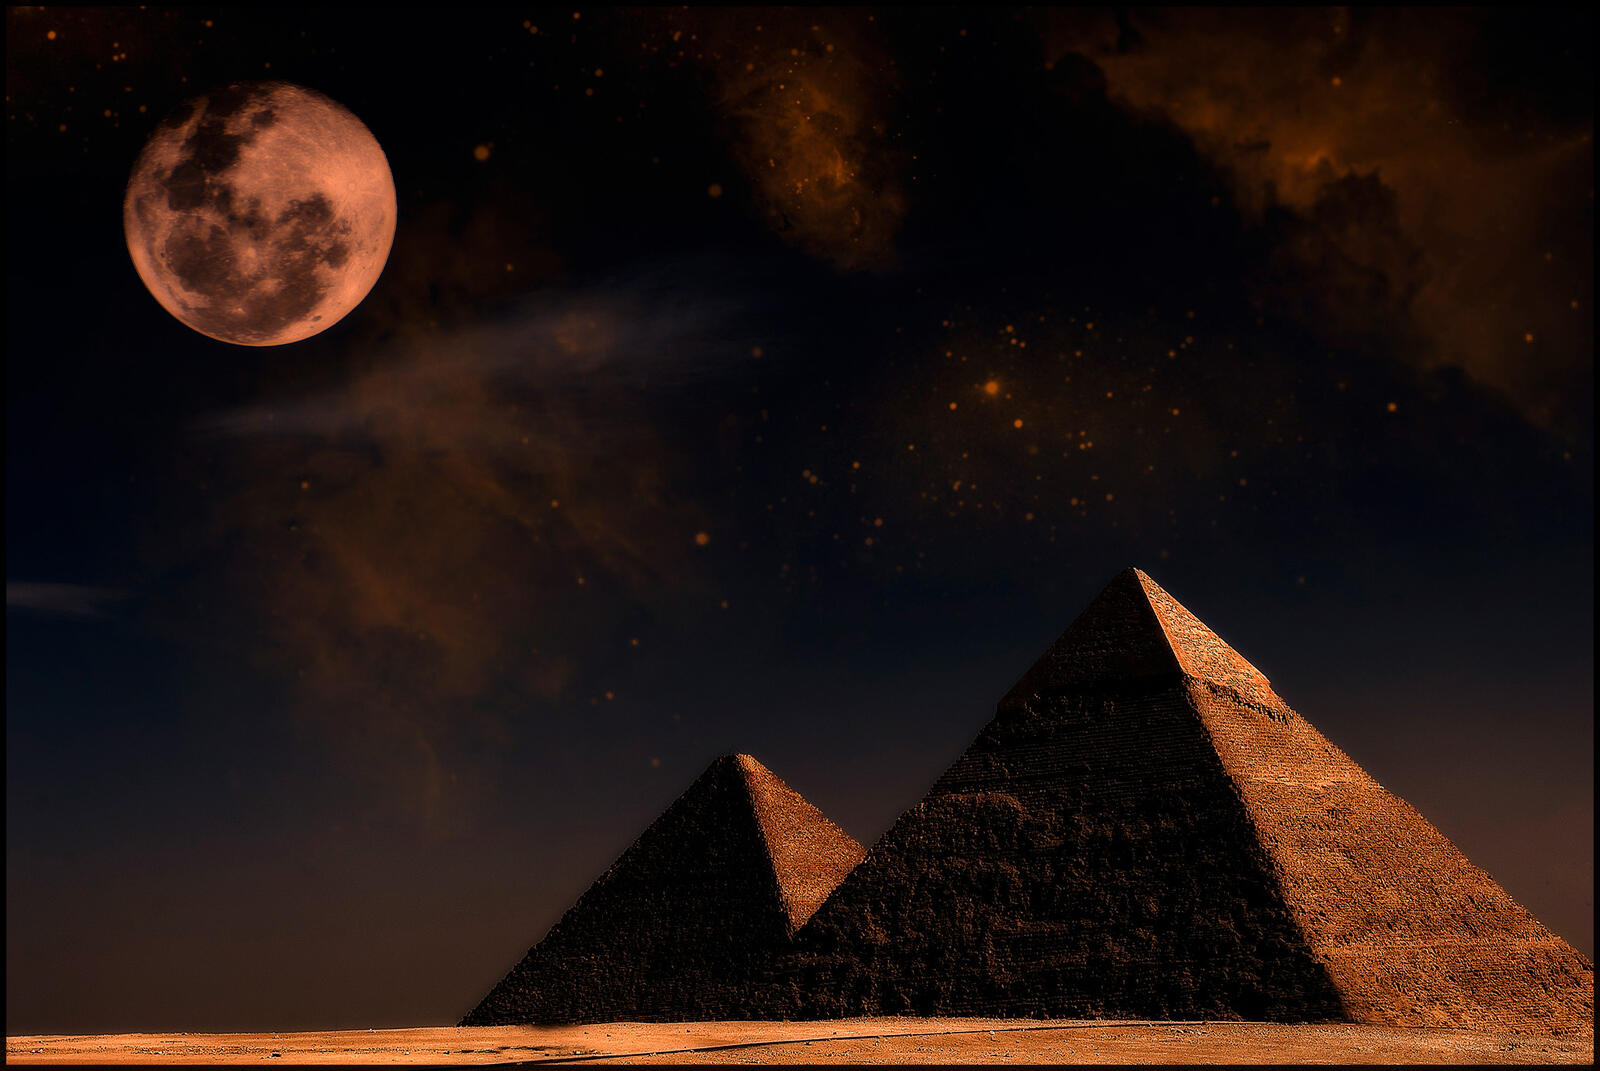 Wallpapers the Egyptian pyramids night Moon on the desktop